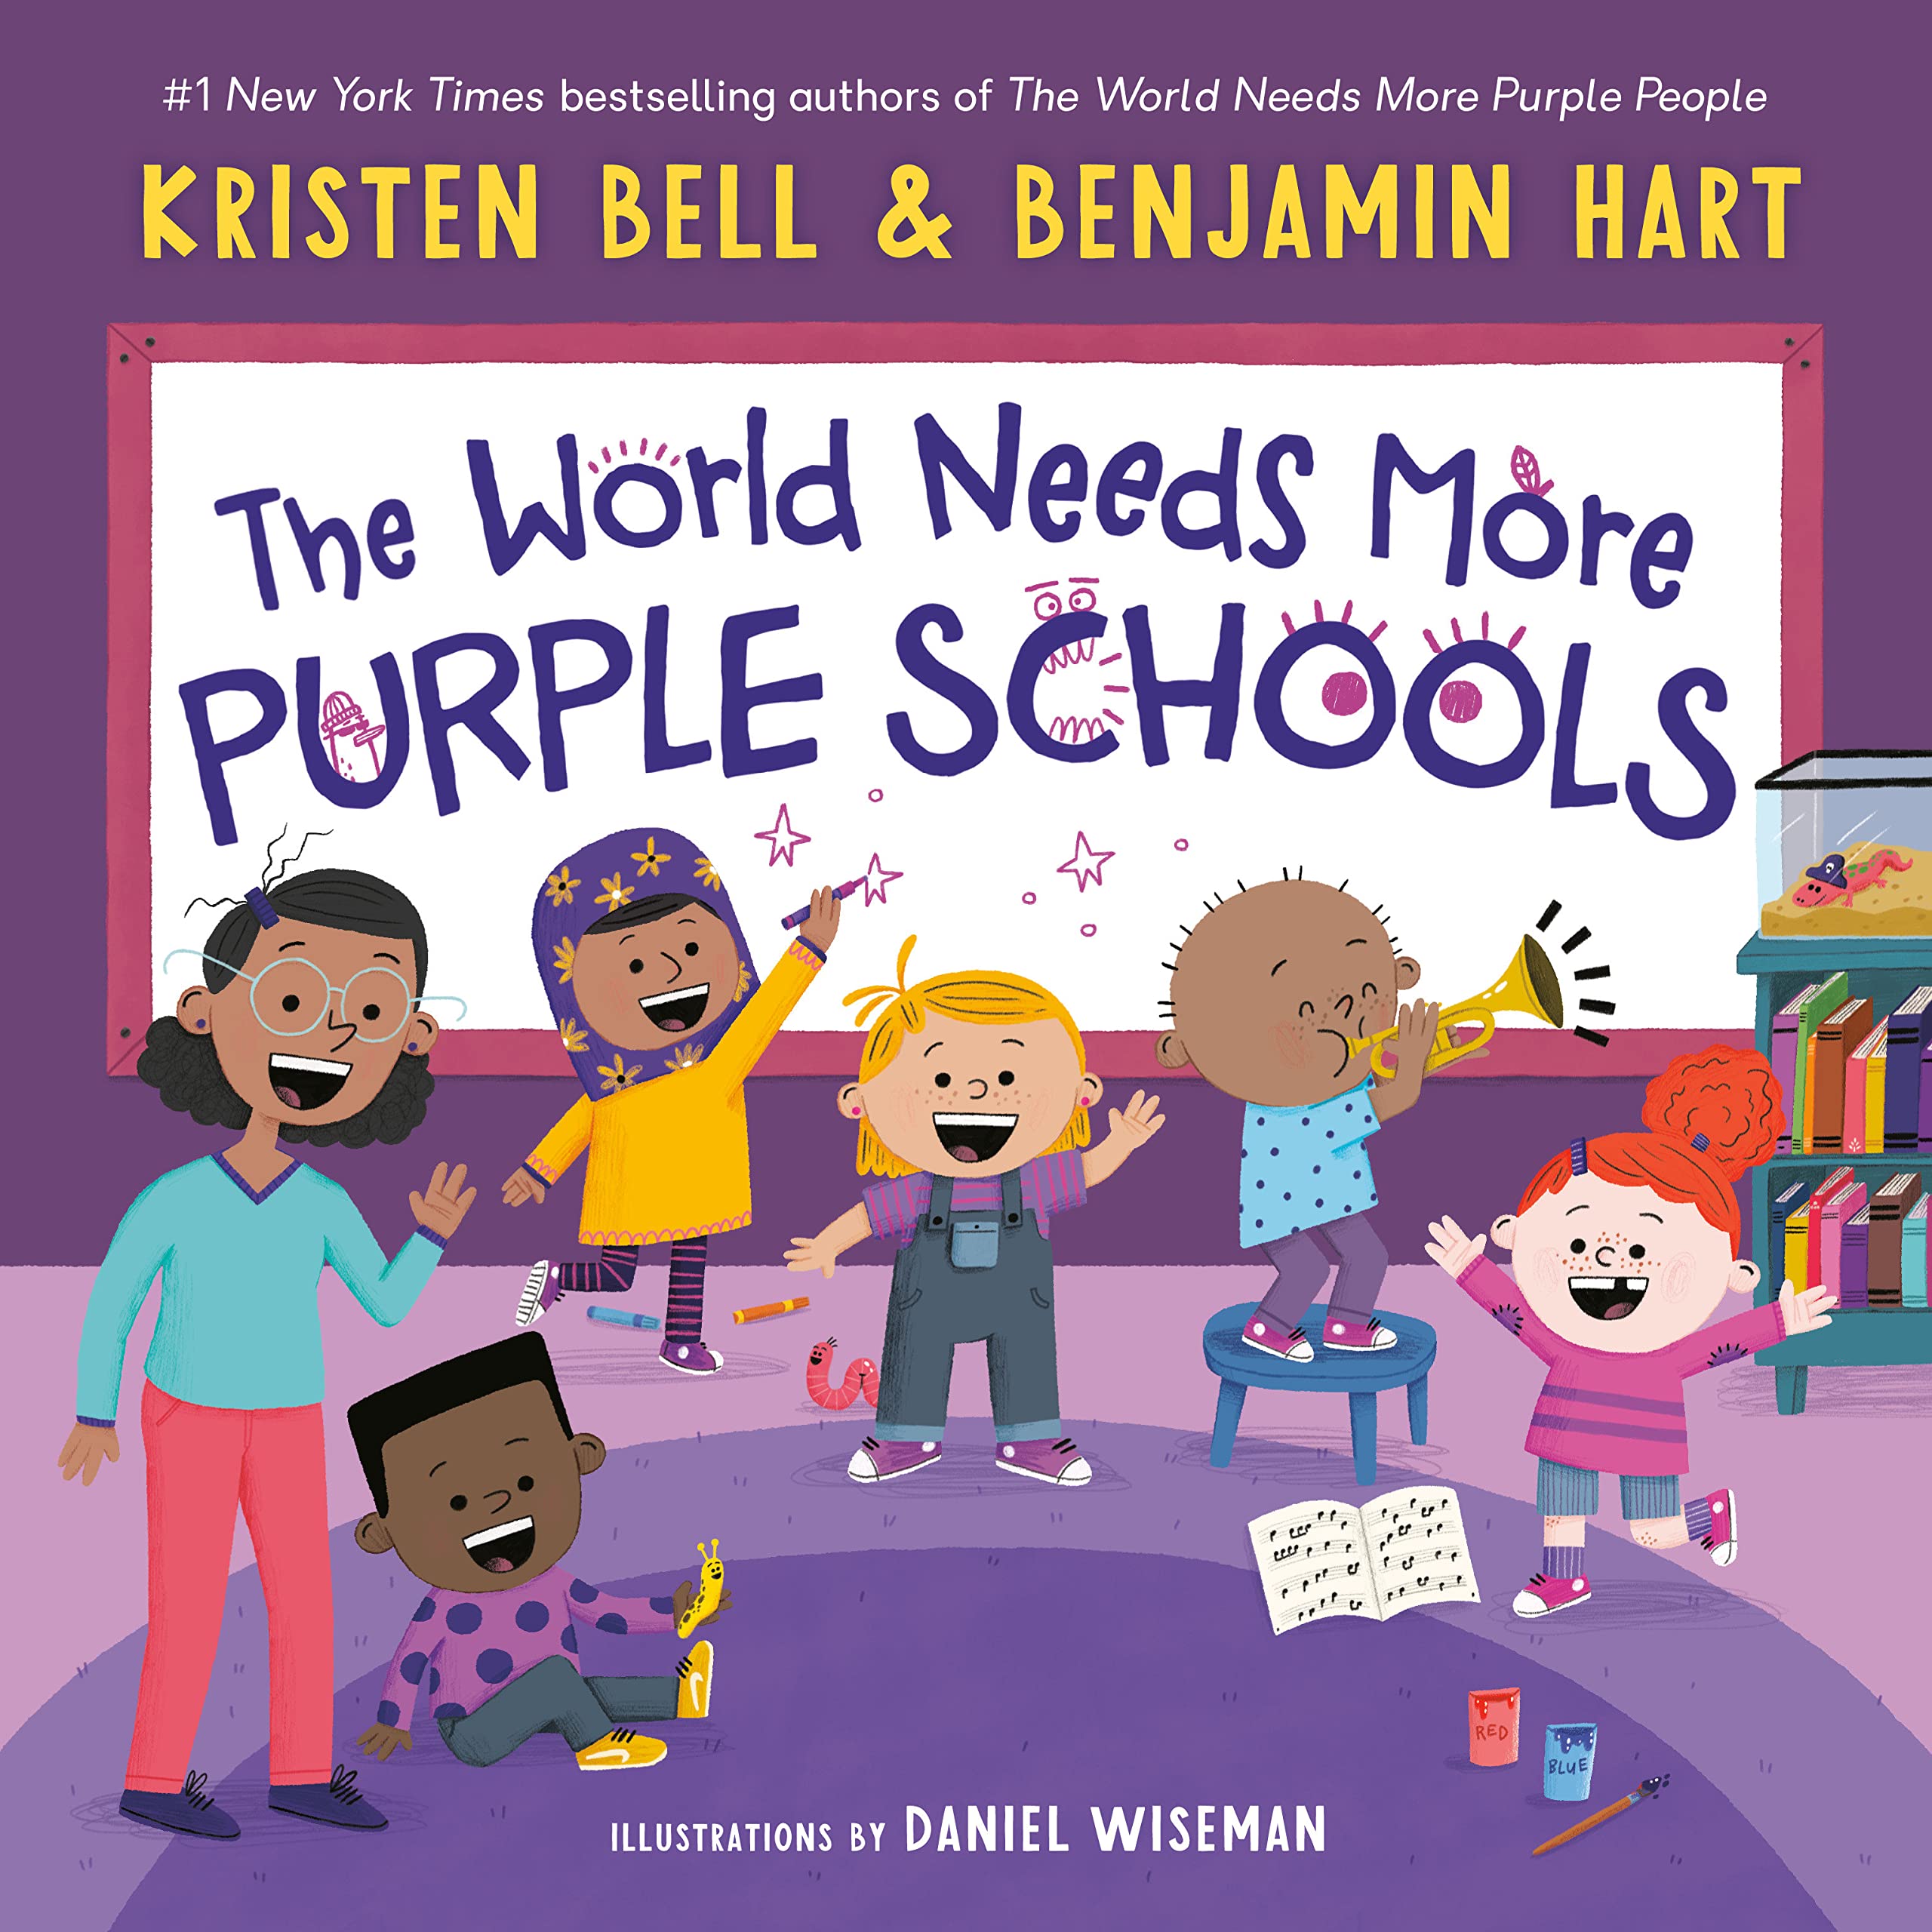 Image for "The World Needs More Purple Schools"